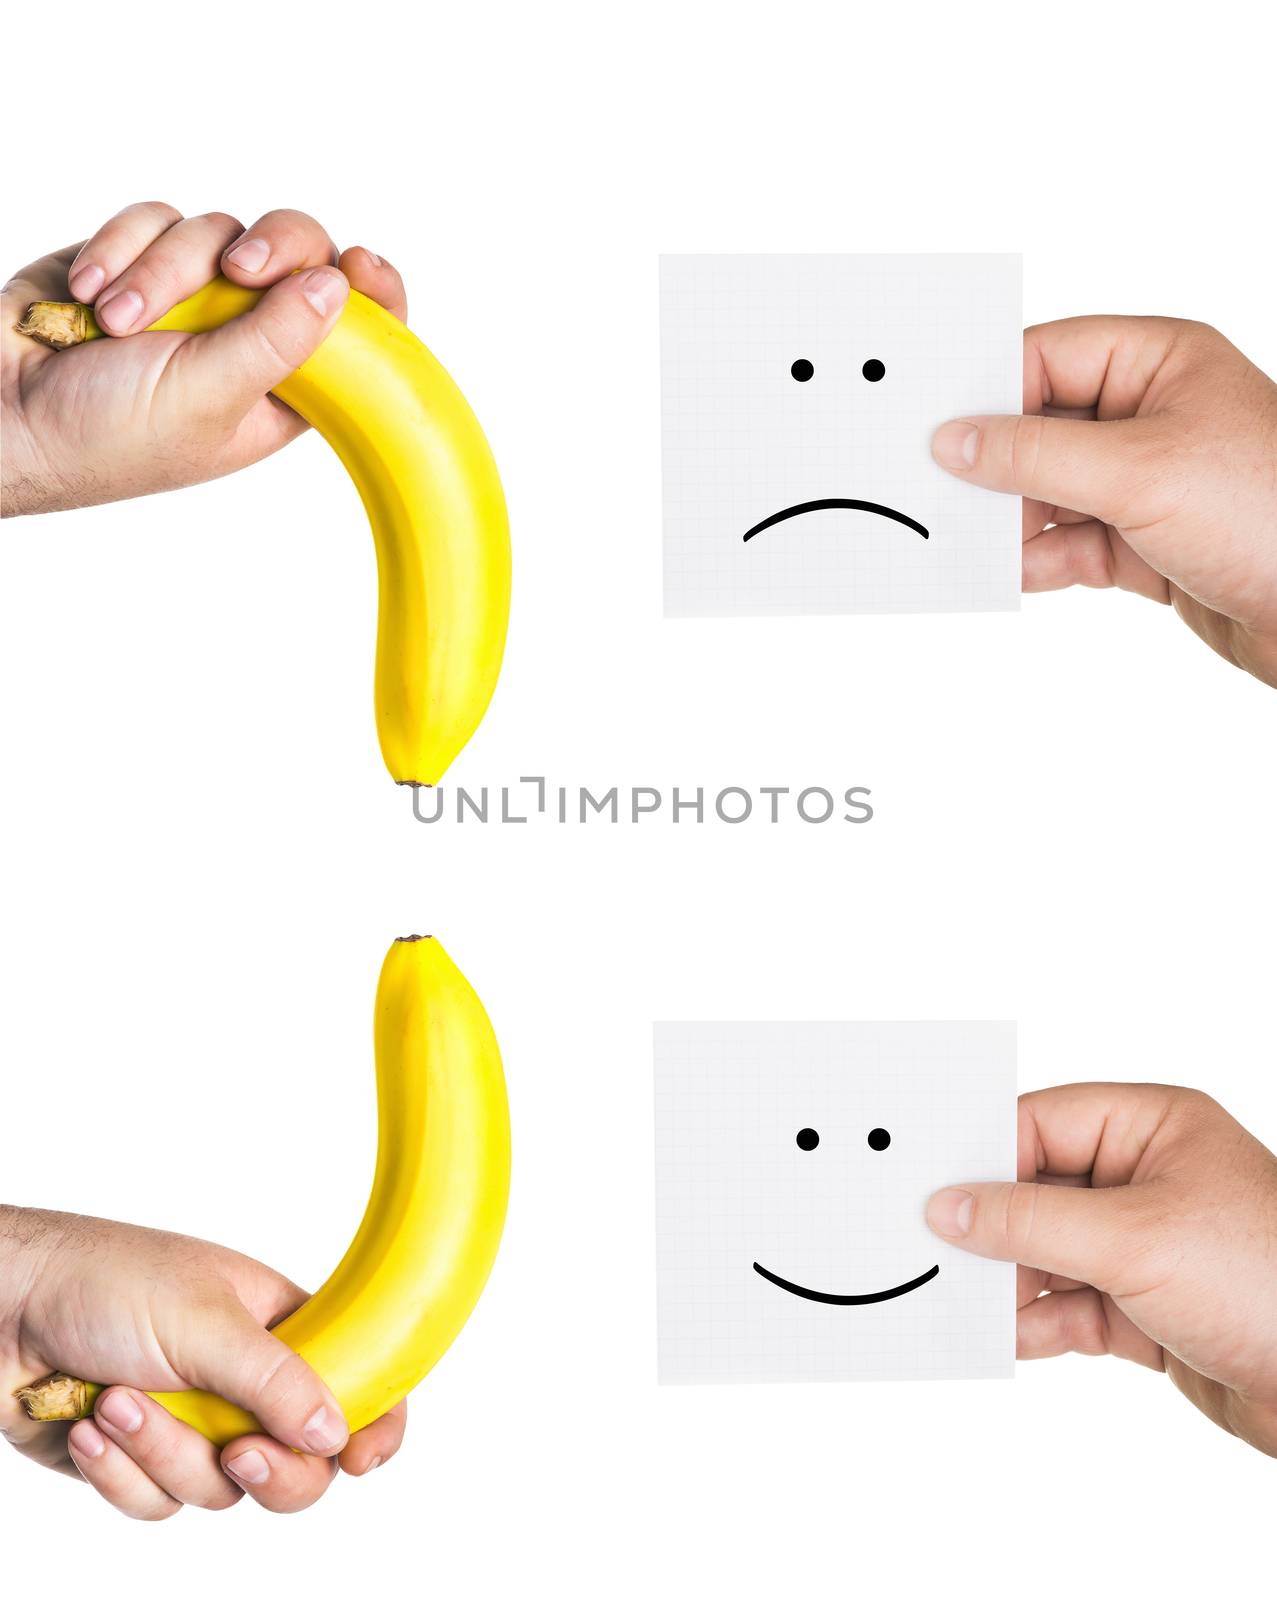 concept of potency, the concept of penis,  two men's hands holding smiley and sad  faces,  two hands hold the big bananas up and down, like the man penis, short, small, medium, average, long size